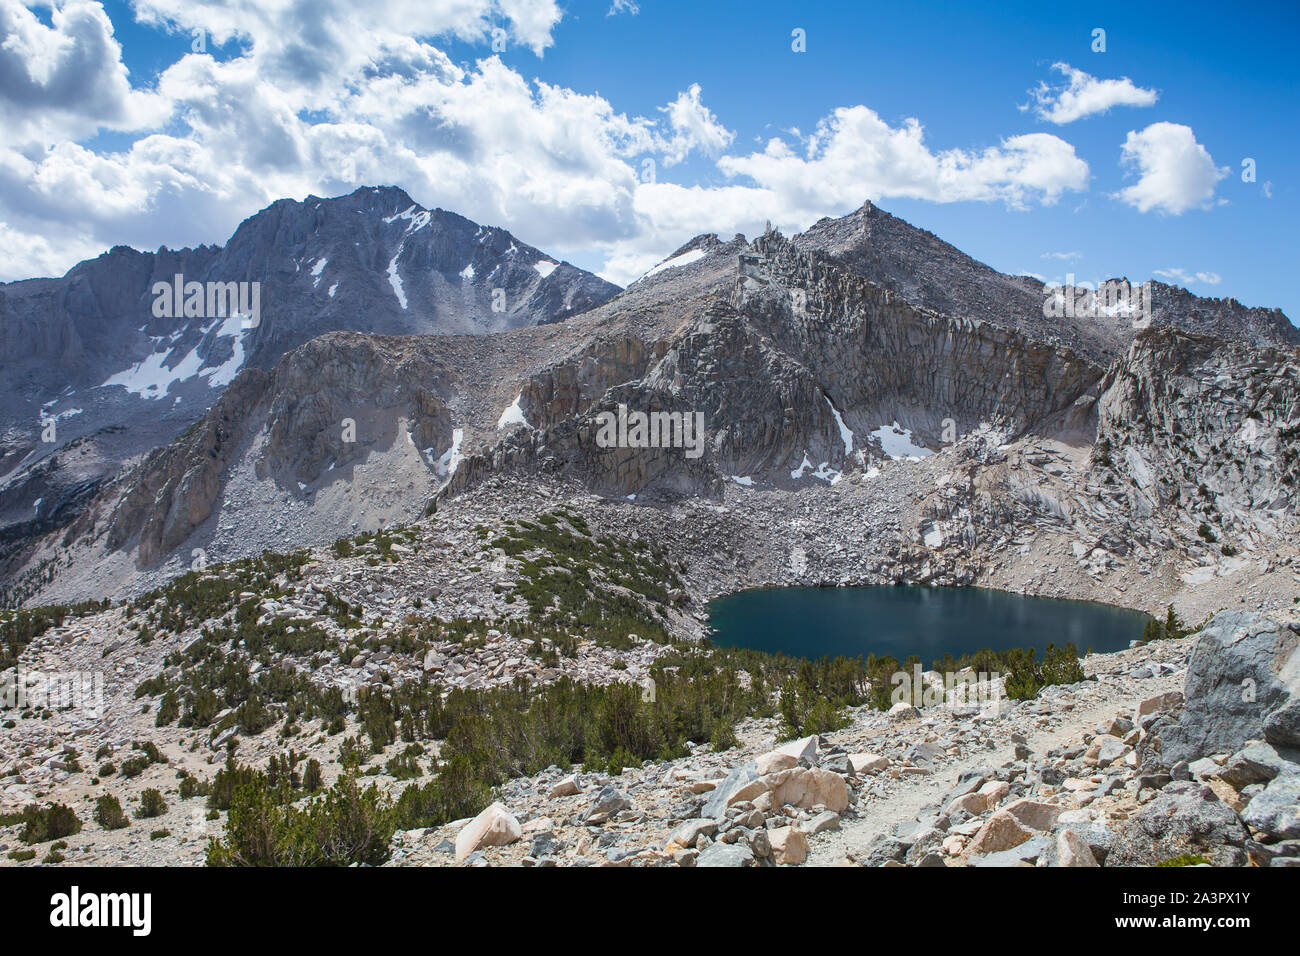 'Big pothole lake' with University Peak in the background and a unknown mountain pyramid on the  'Kearsarge Pass Trail' in the Sierra Nevada mountains Stock Photo